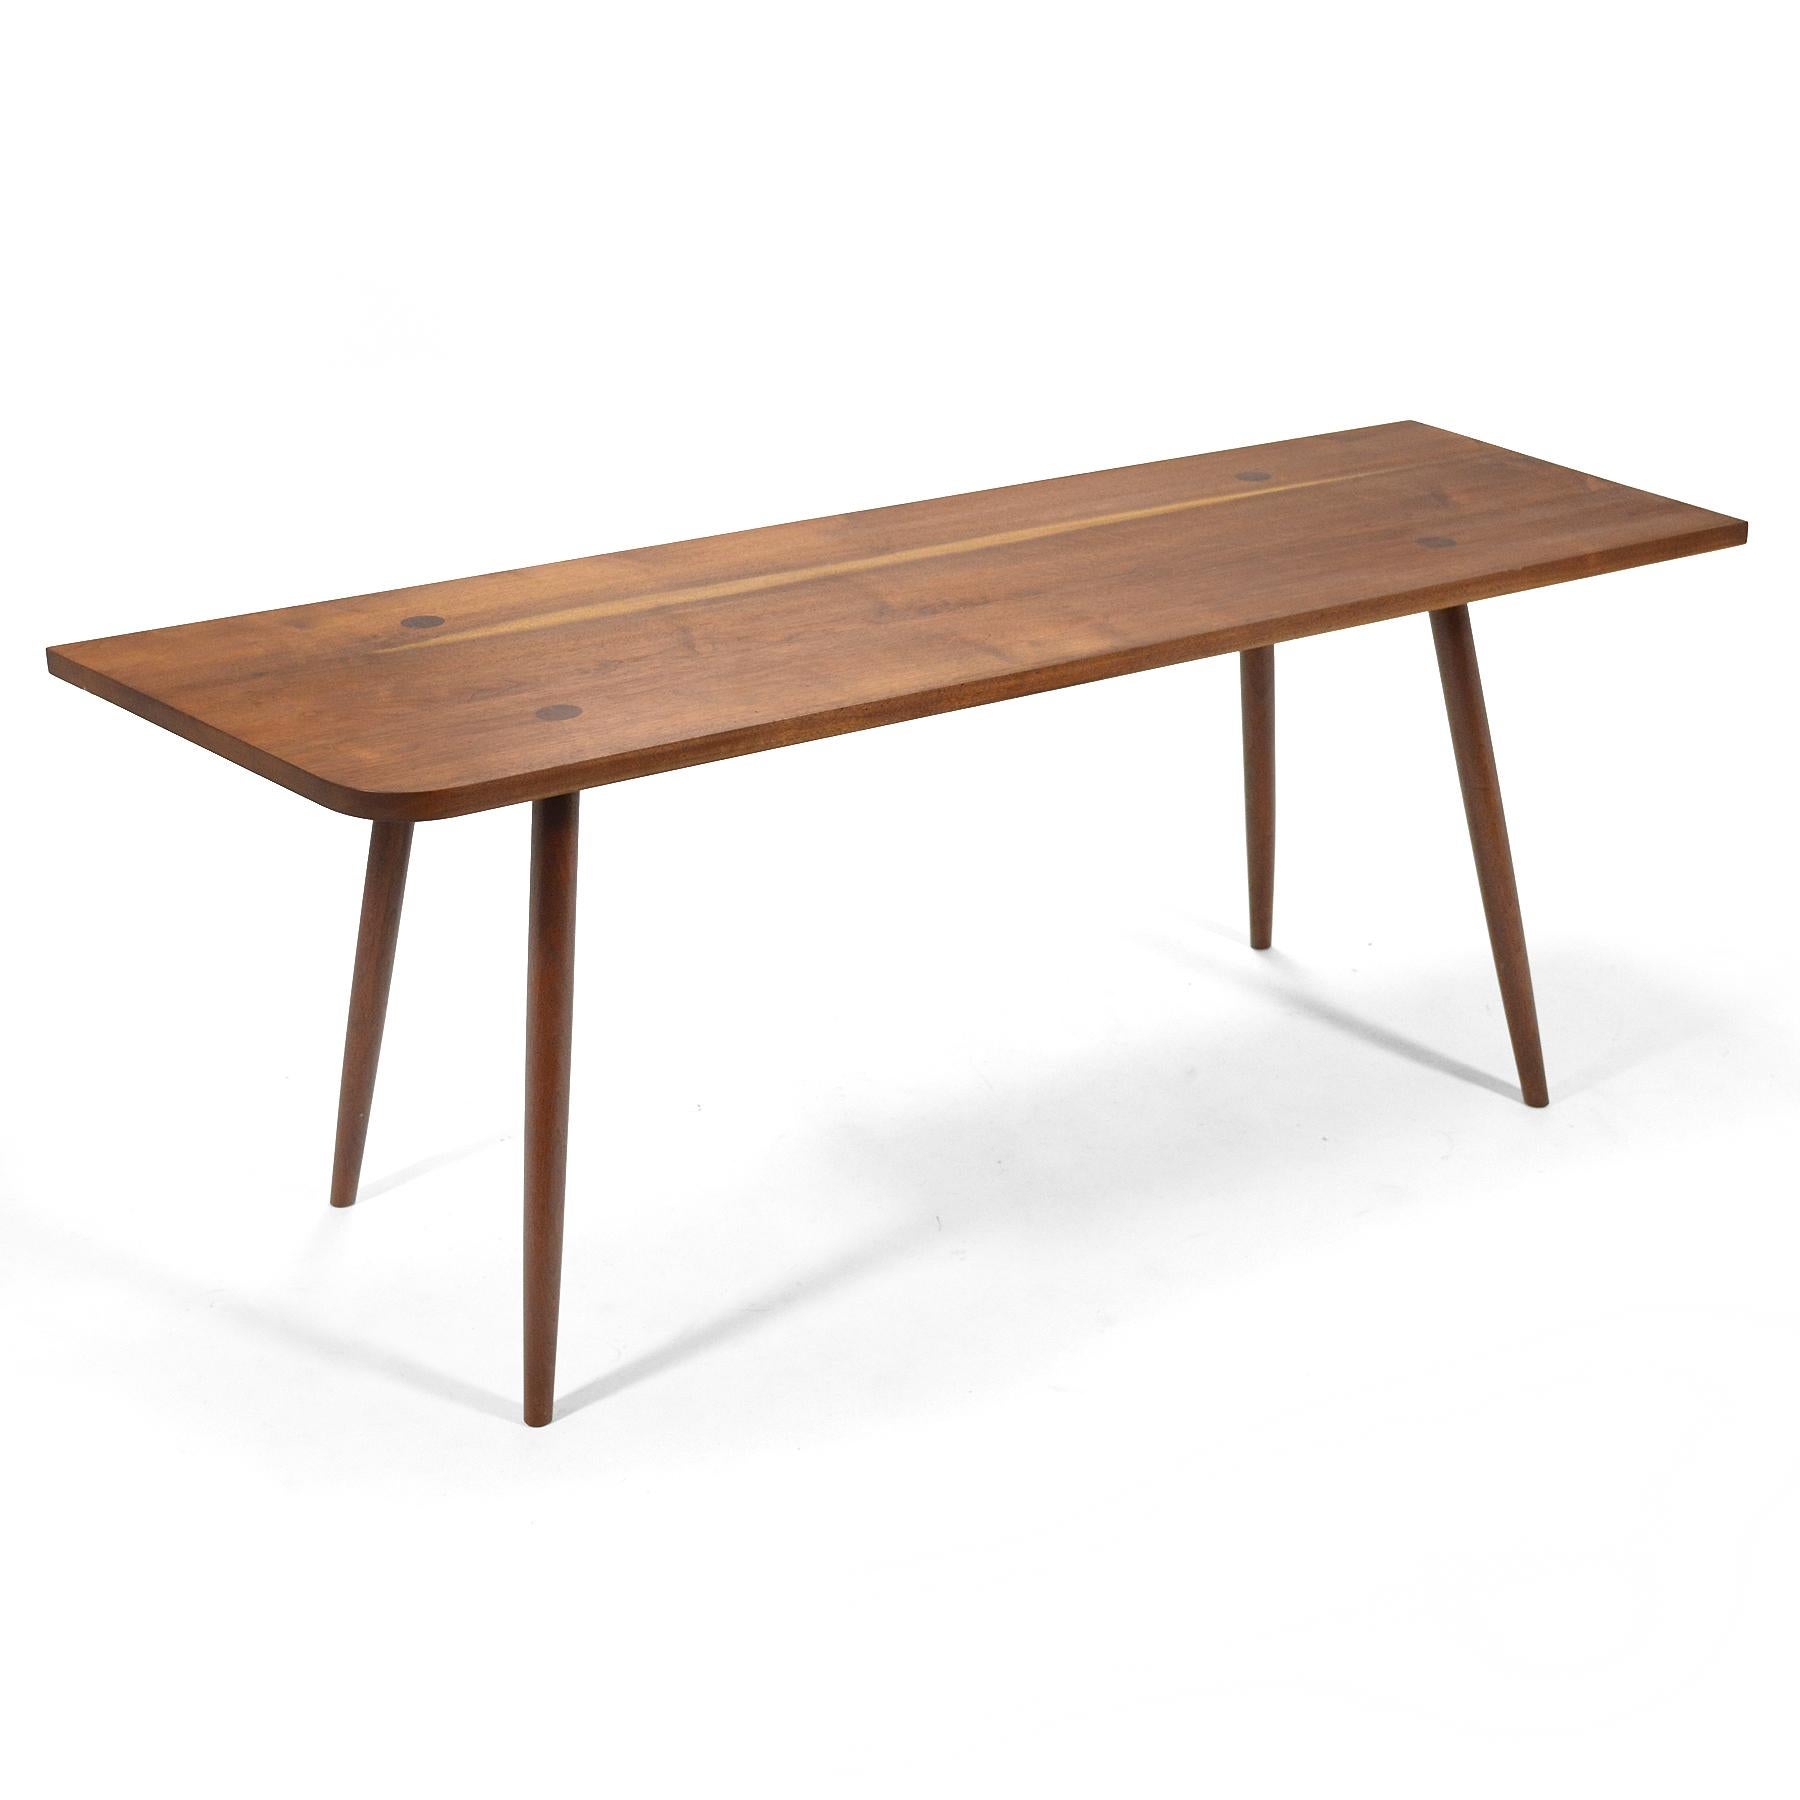 This beautiful table crafted of black walnut was designed and handcrafted in 1961 by Robert Lovett. It is expertly built with through-tenon legs and subtle details like the single radiused corner and angled edge. It is beautifully scaled allowing it